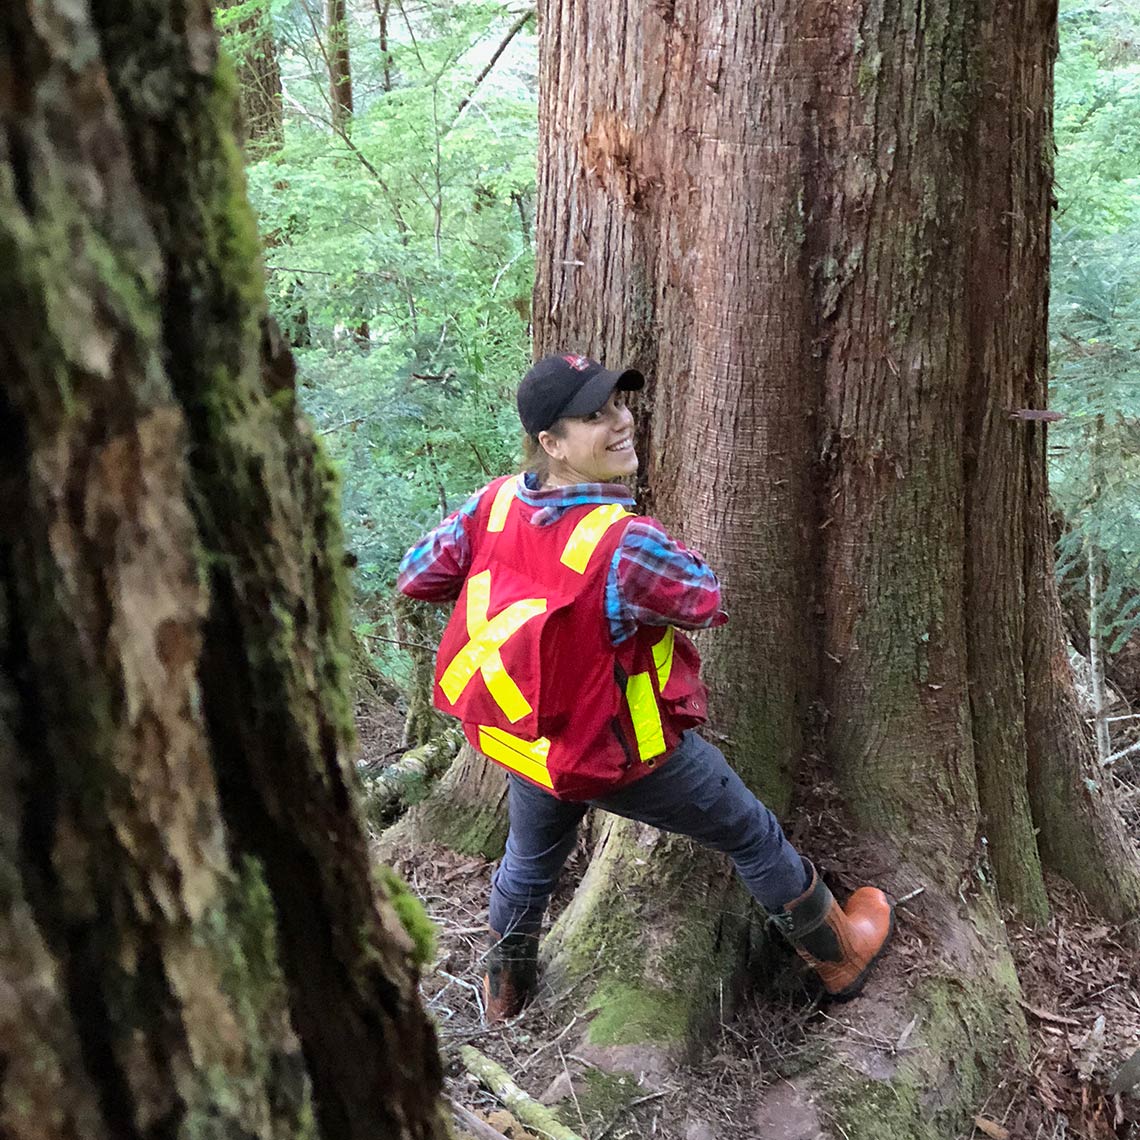 Julie Nielsen at work in the forests of northern Vancouver Island